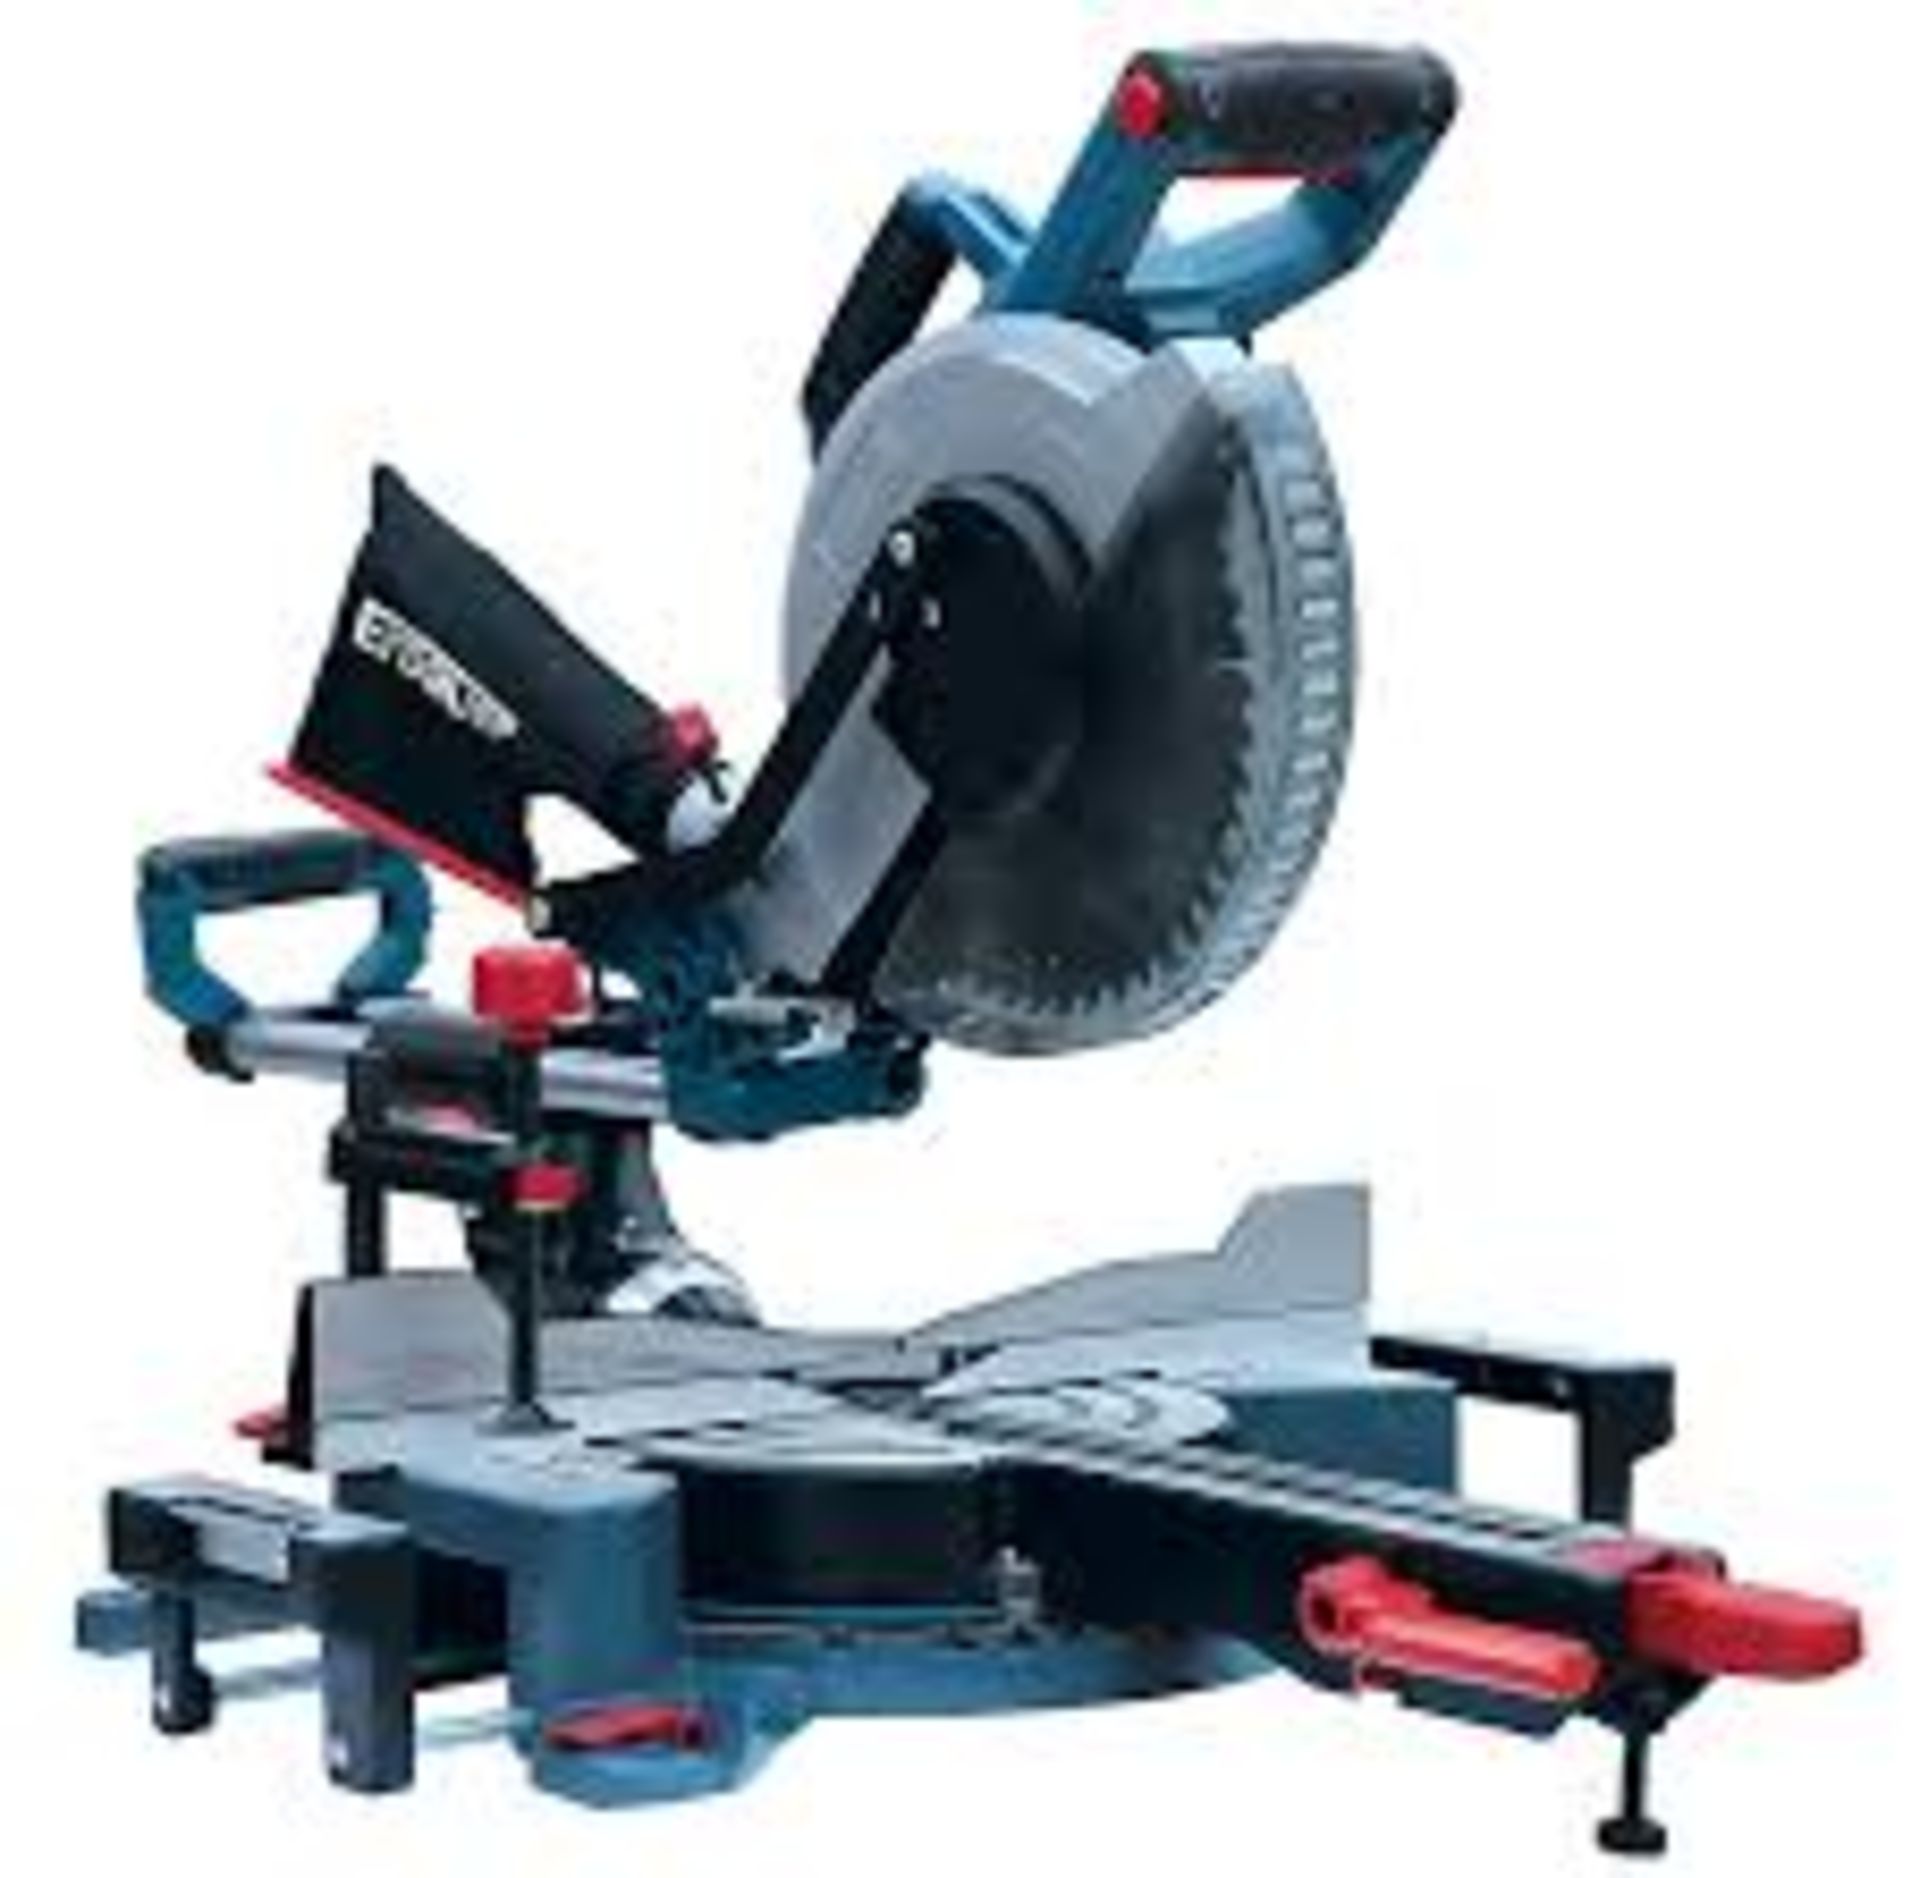 Erbauer 1800W 220-240V 254mm Corded Sliding mitre saw EMIS254S. - P5. Equipped with LED light and